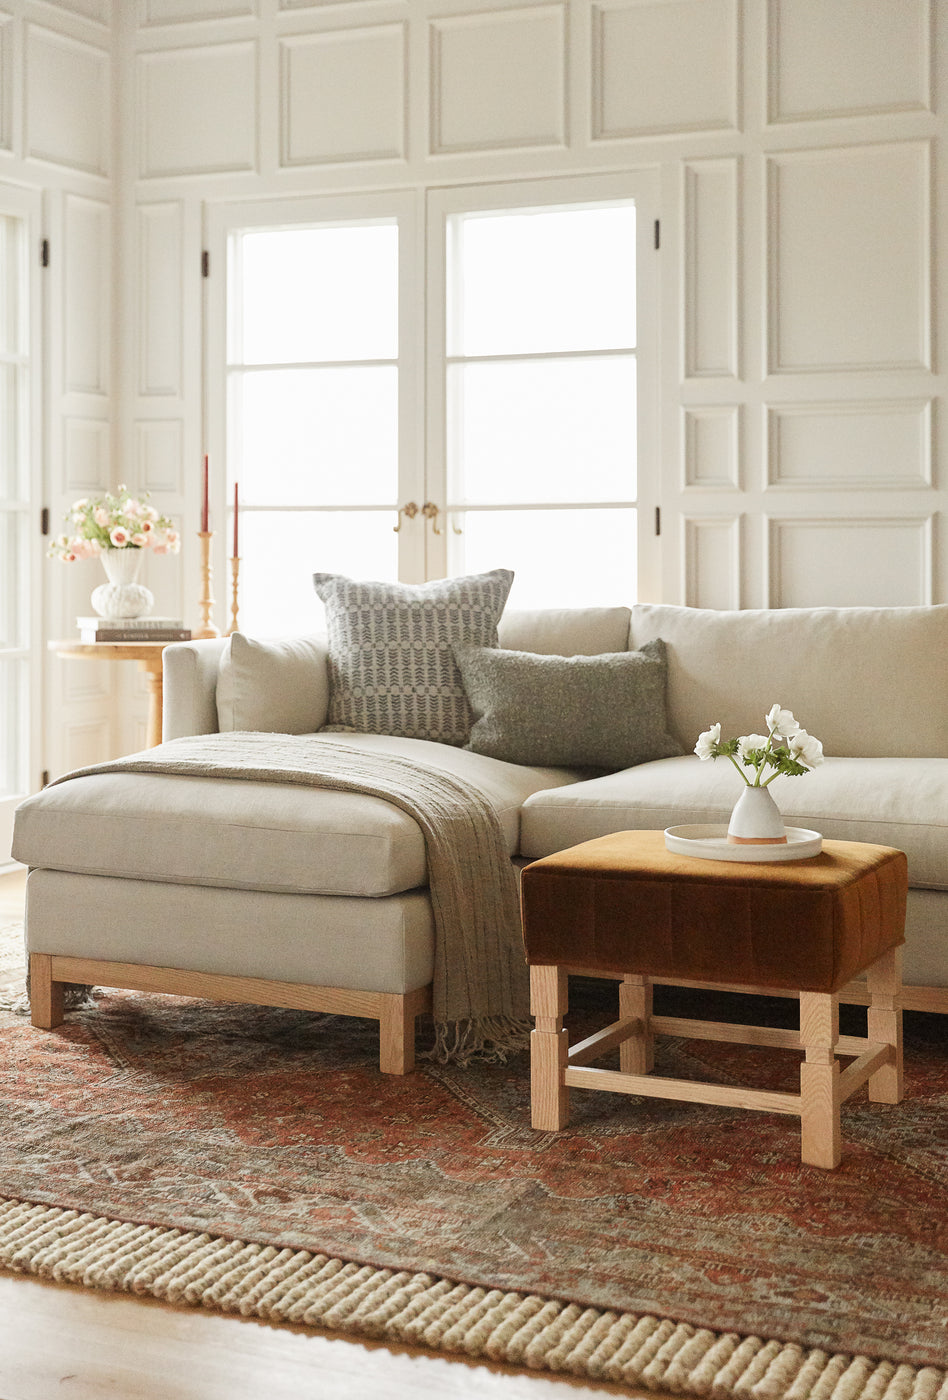 How to Match Throw Pillows + Rugs